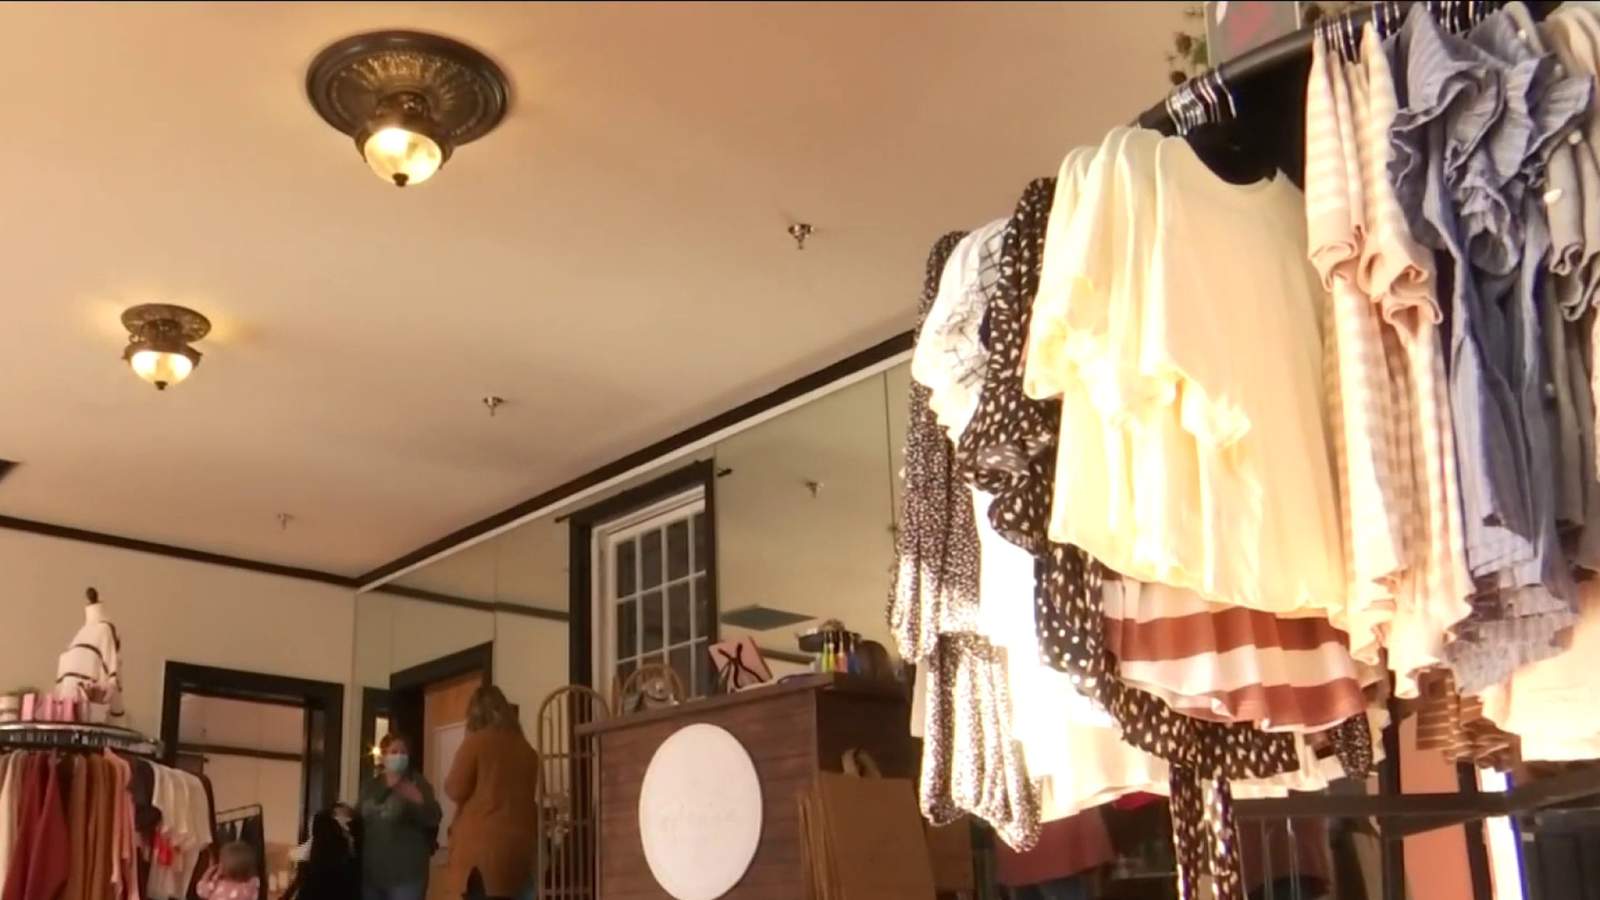 Downtown Lynchburg women’s clothing boutique holds grand opening on Black Friday